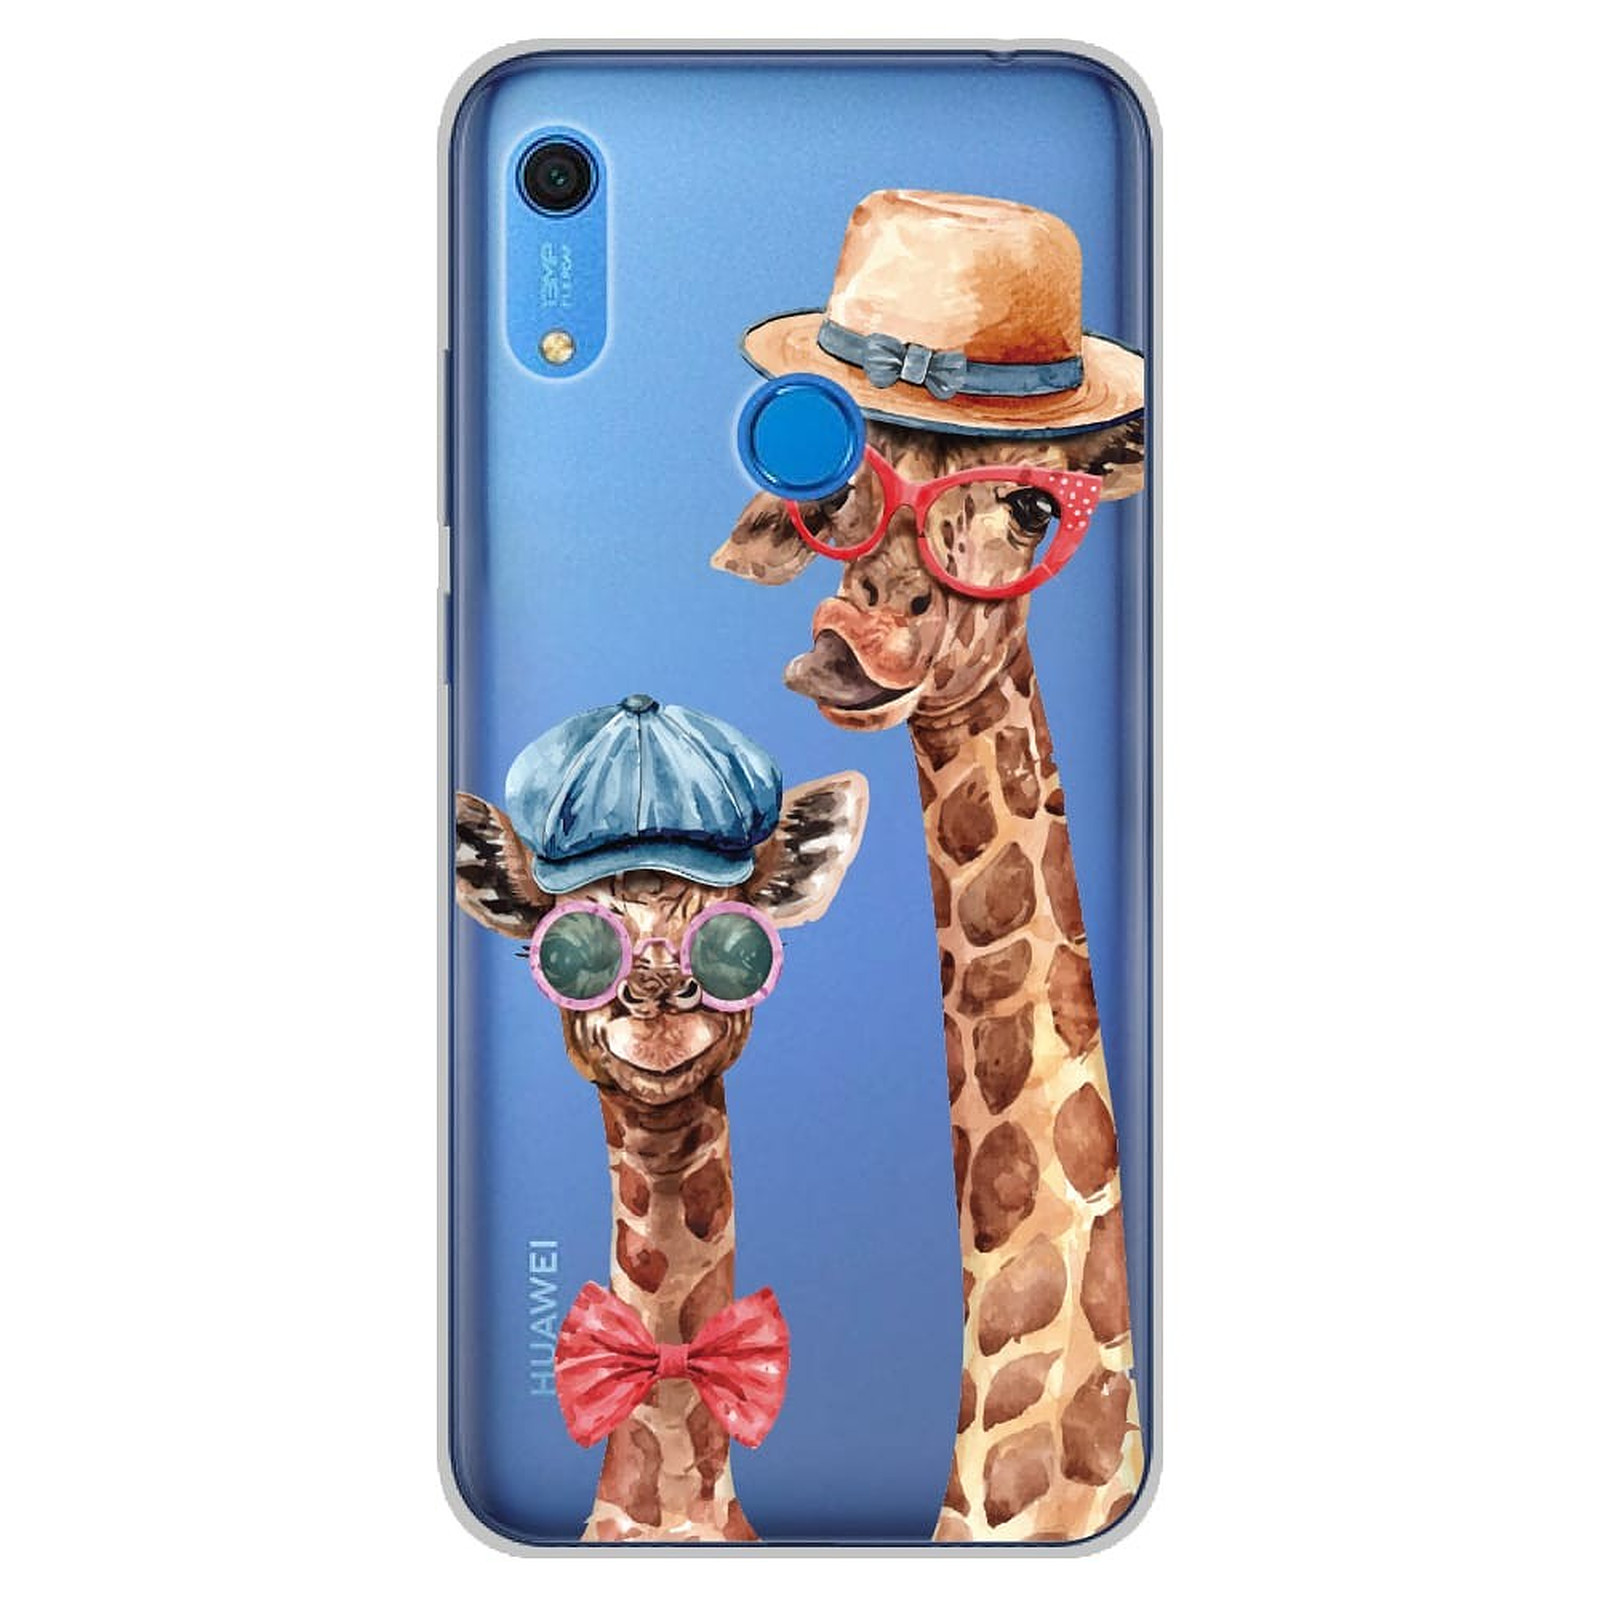 1001 Coques Coque silicone gel Huawei Y6S motif Funny Girafe - Coque telephone 1001Coques